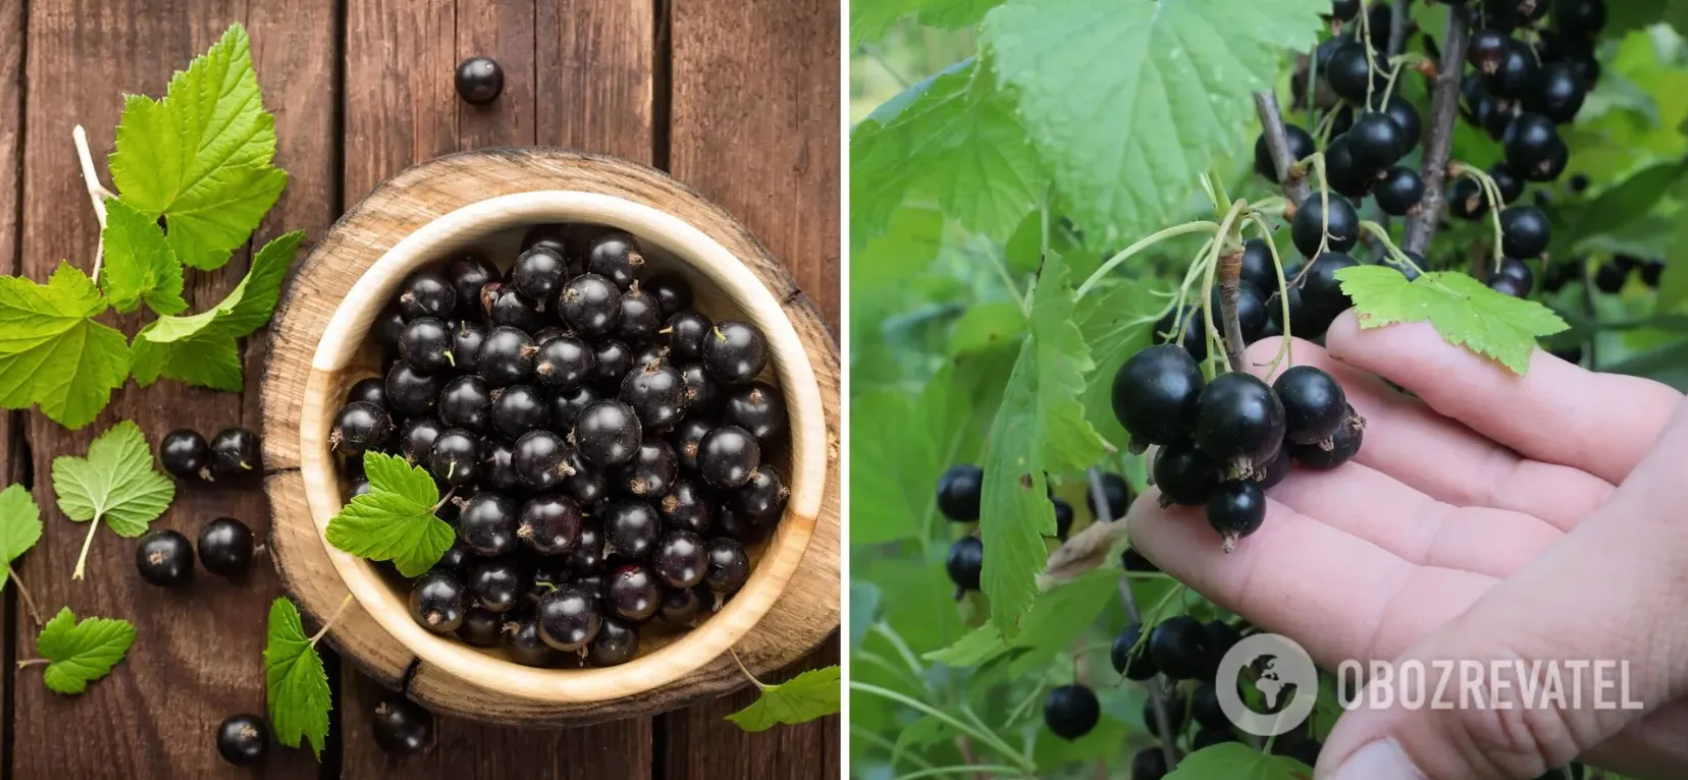 How to make jam from currants